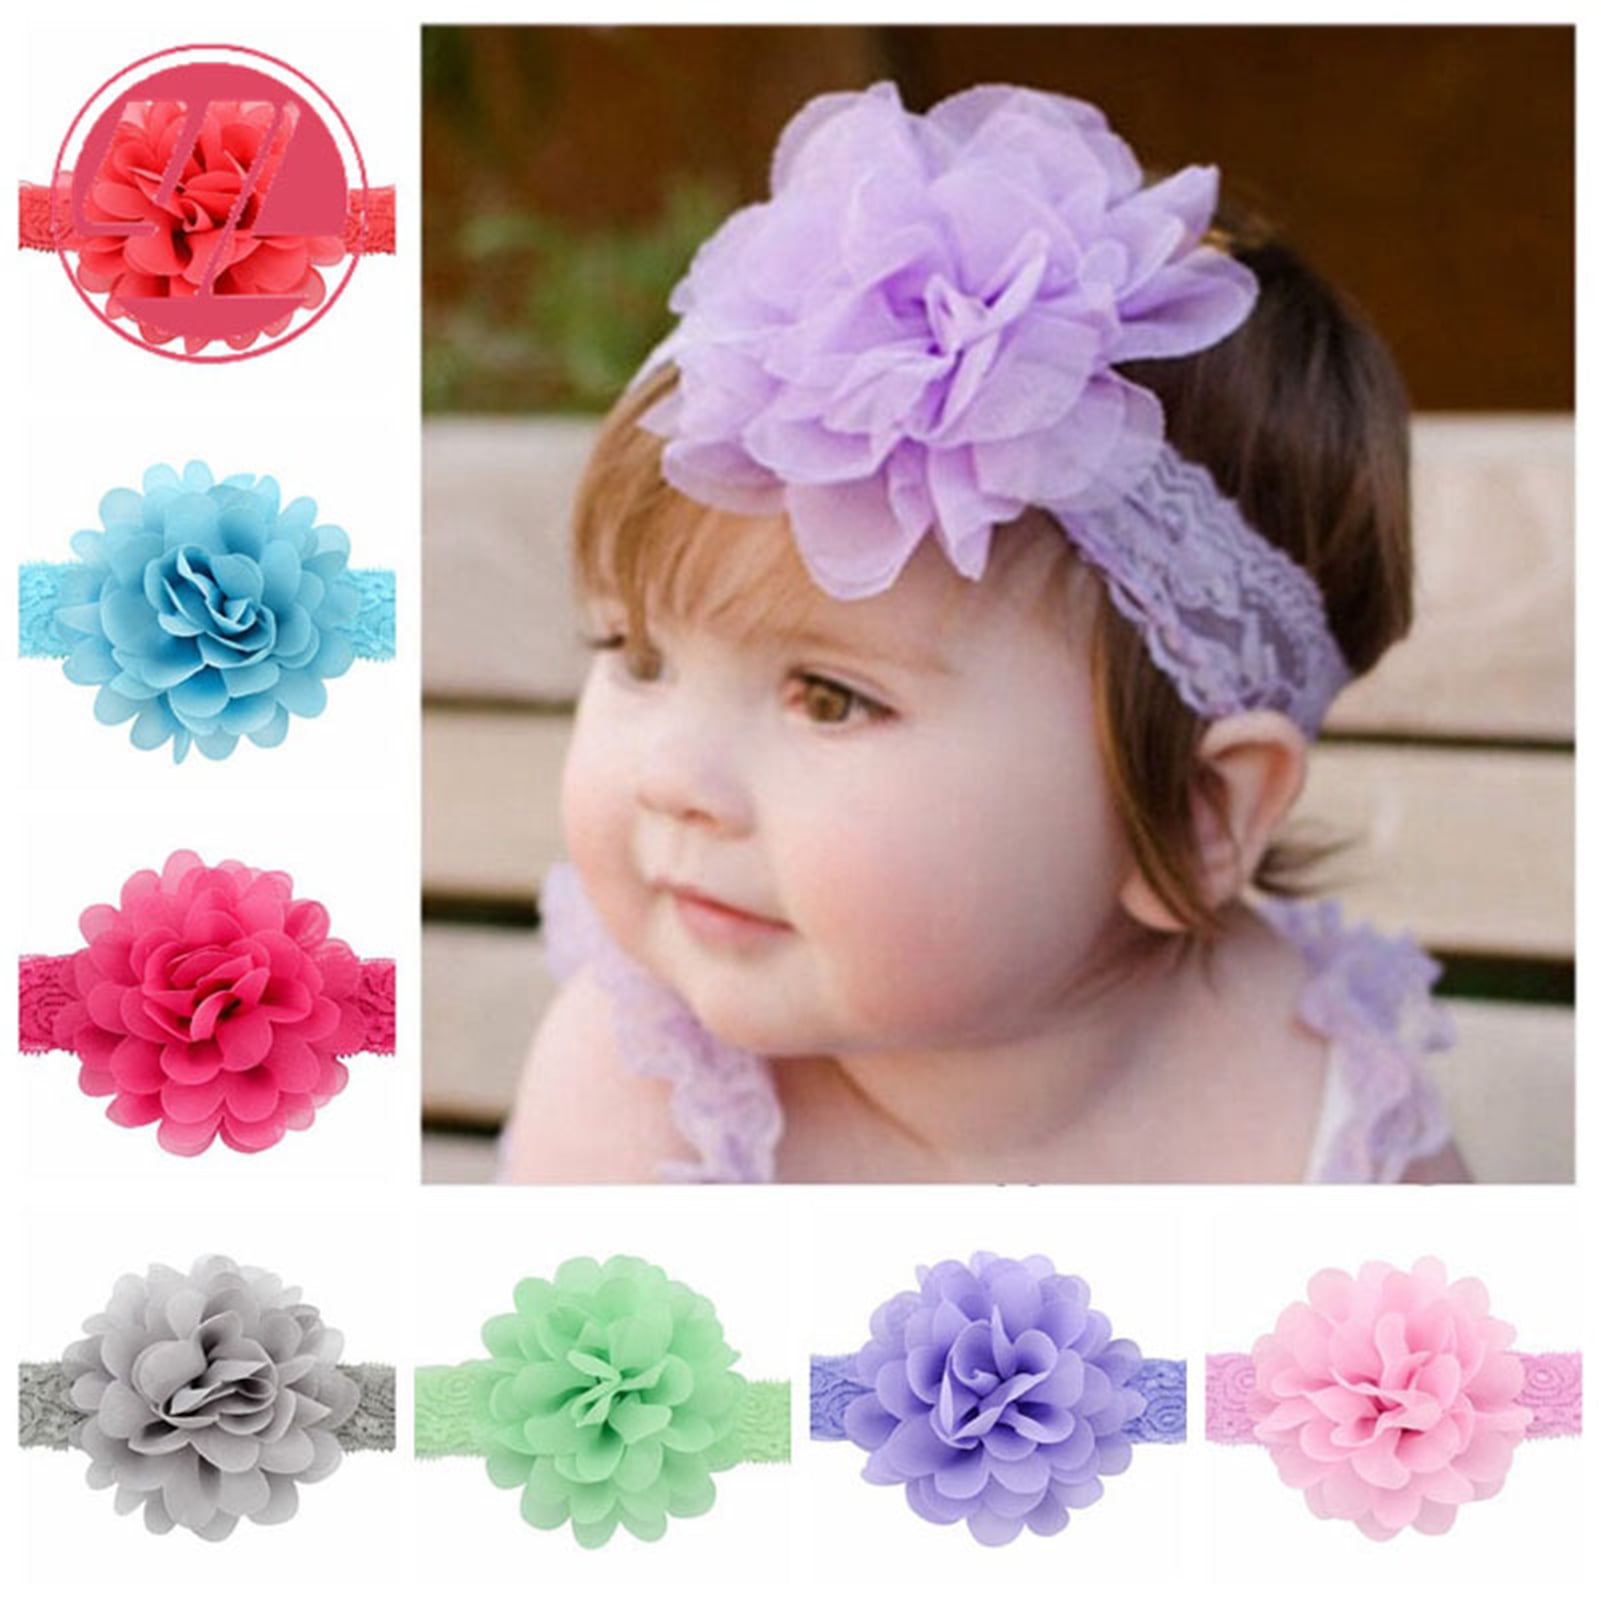 Walbest Baby Girls Hair Band Chiffon Flower Lace Headband Fixed Hairstyle  Lightweight Creative Hair band for Toddlers 